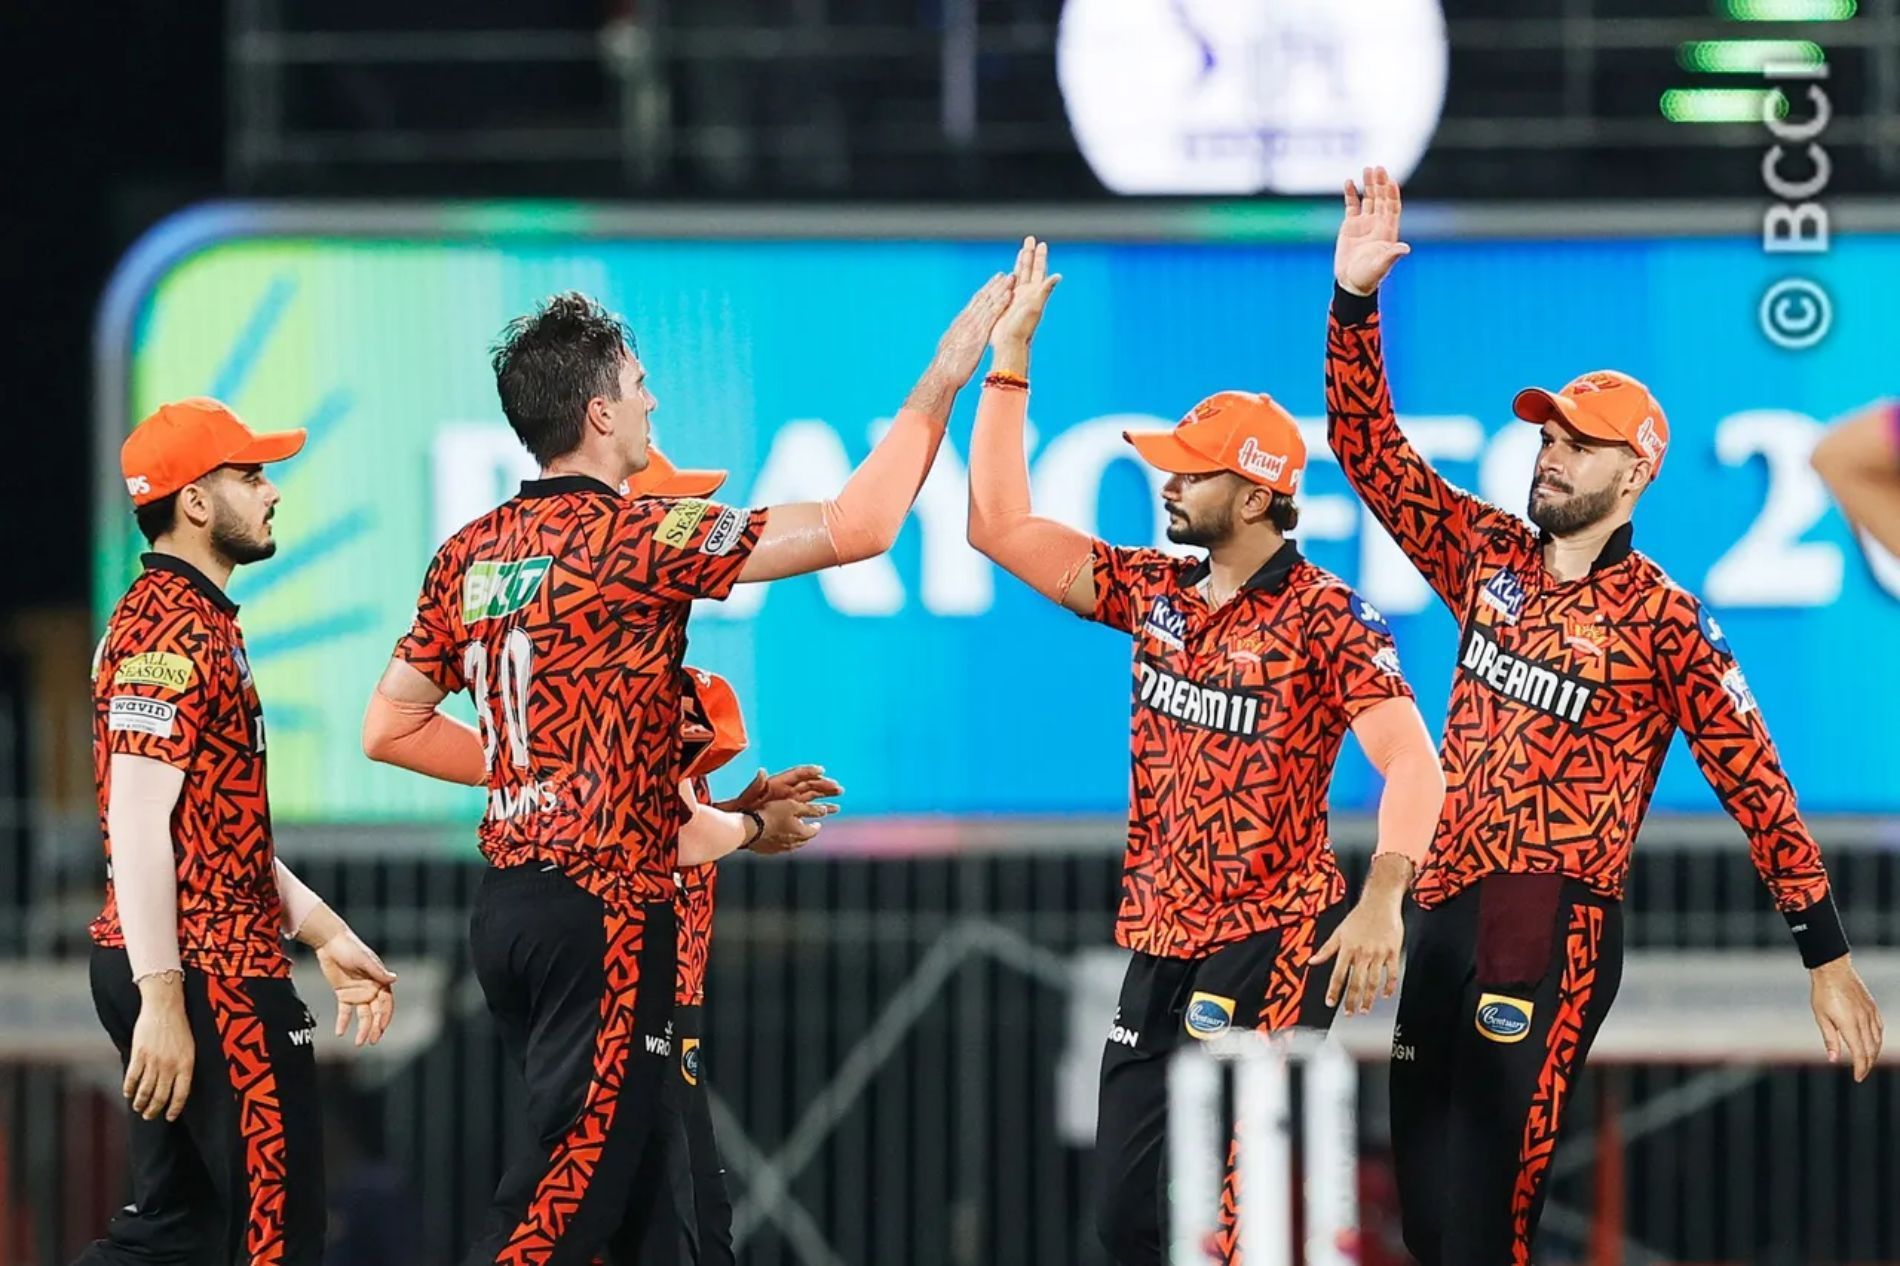 Pat Cummins got the early breakthrough in Rajasthan&rsquo;s chase. (Image Credit: BCCI/ iplt20.com)